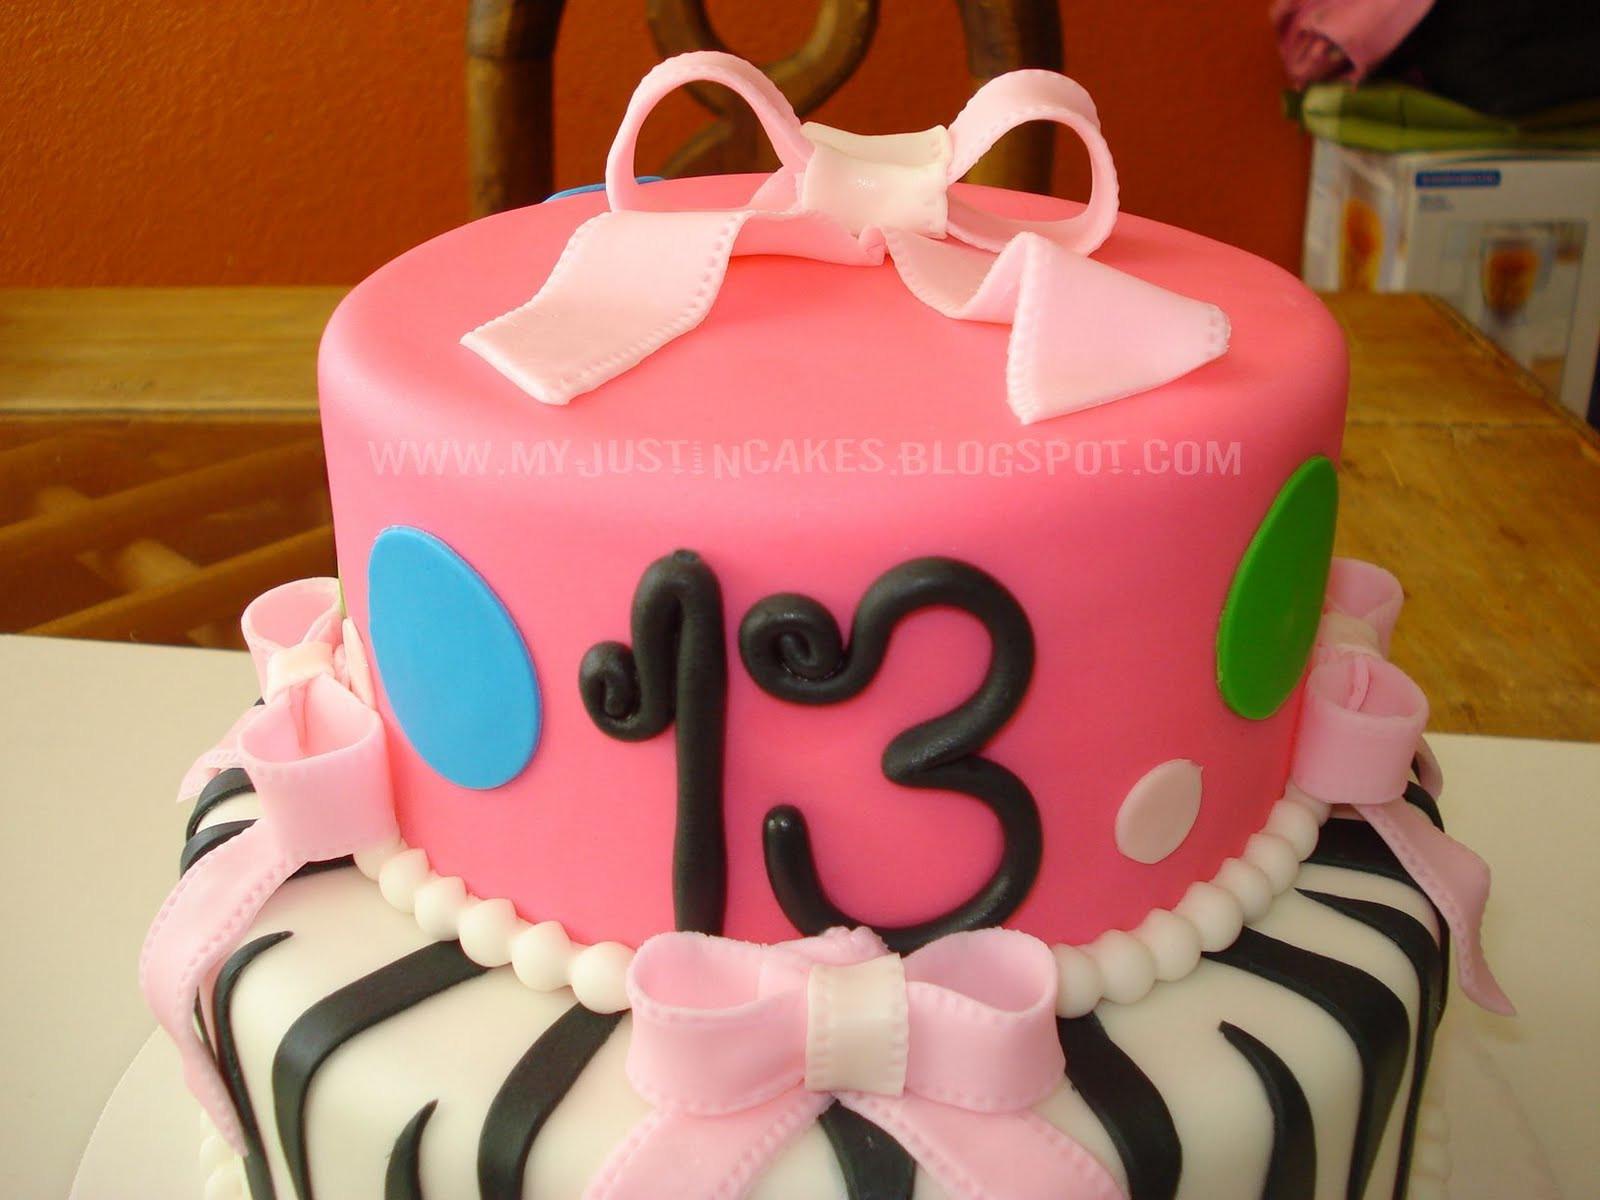 13 Years Old Birthday Cake
 Just in Cakes 13 Year Old Girl Birthday Cake